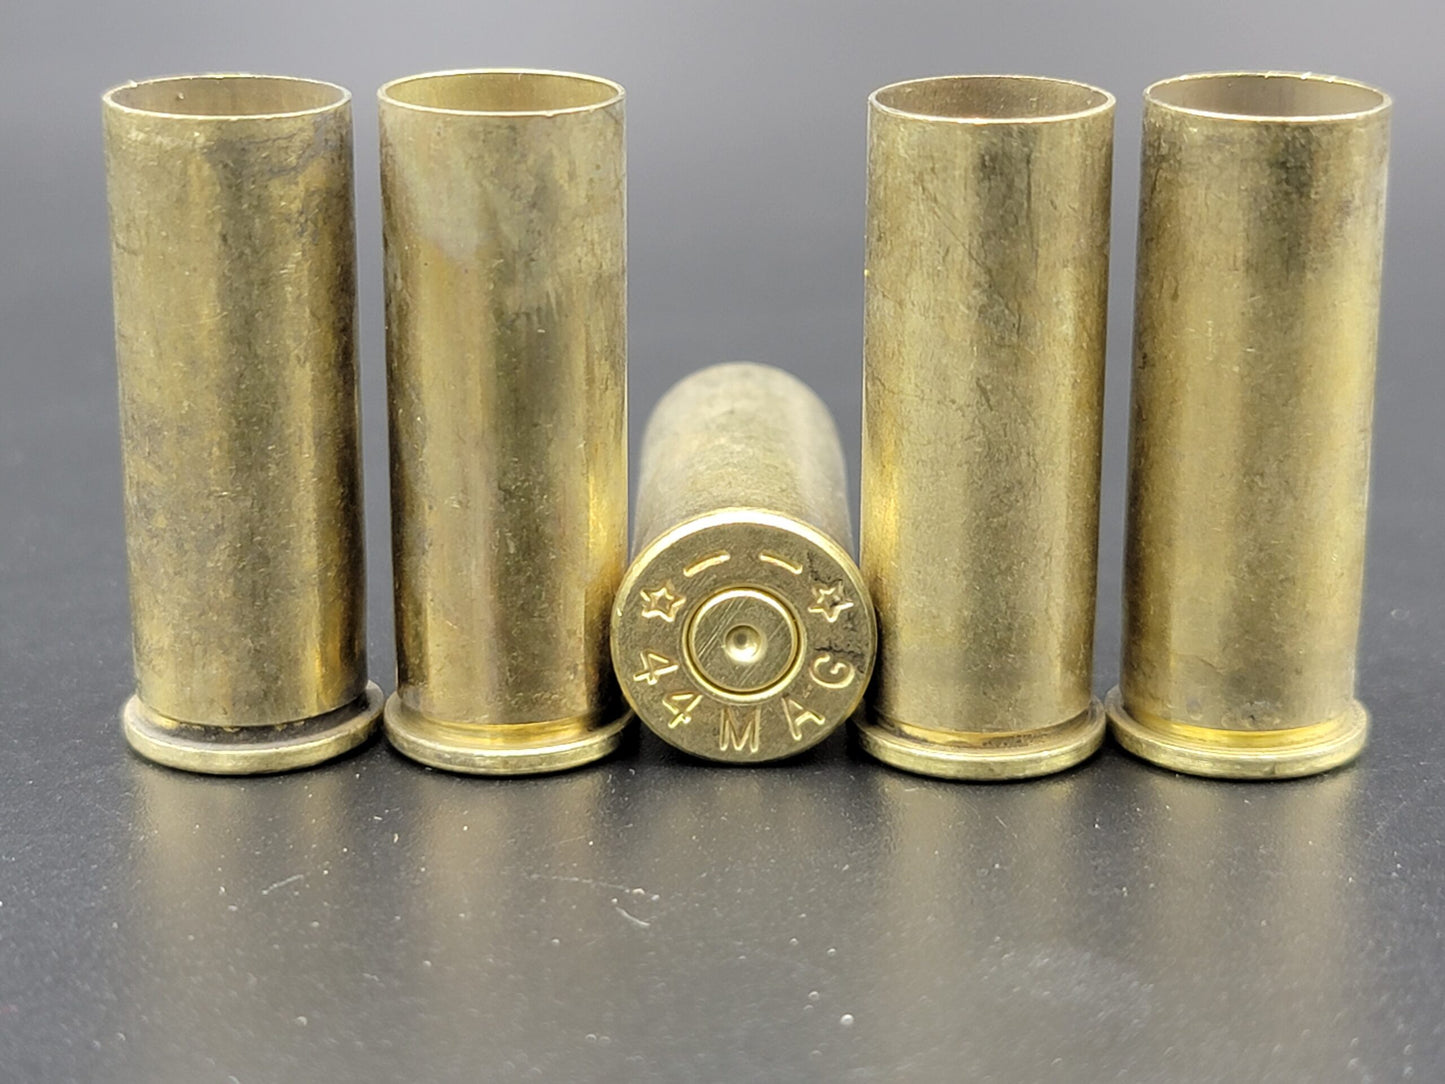 44 Rem Mag once fired pistol brass. Hand sorted from reputable indoor/military ranges for reloading. Reliable spent casings for precision shooting.